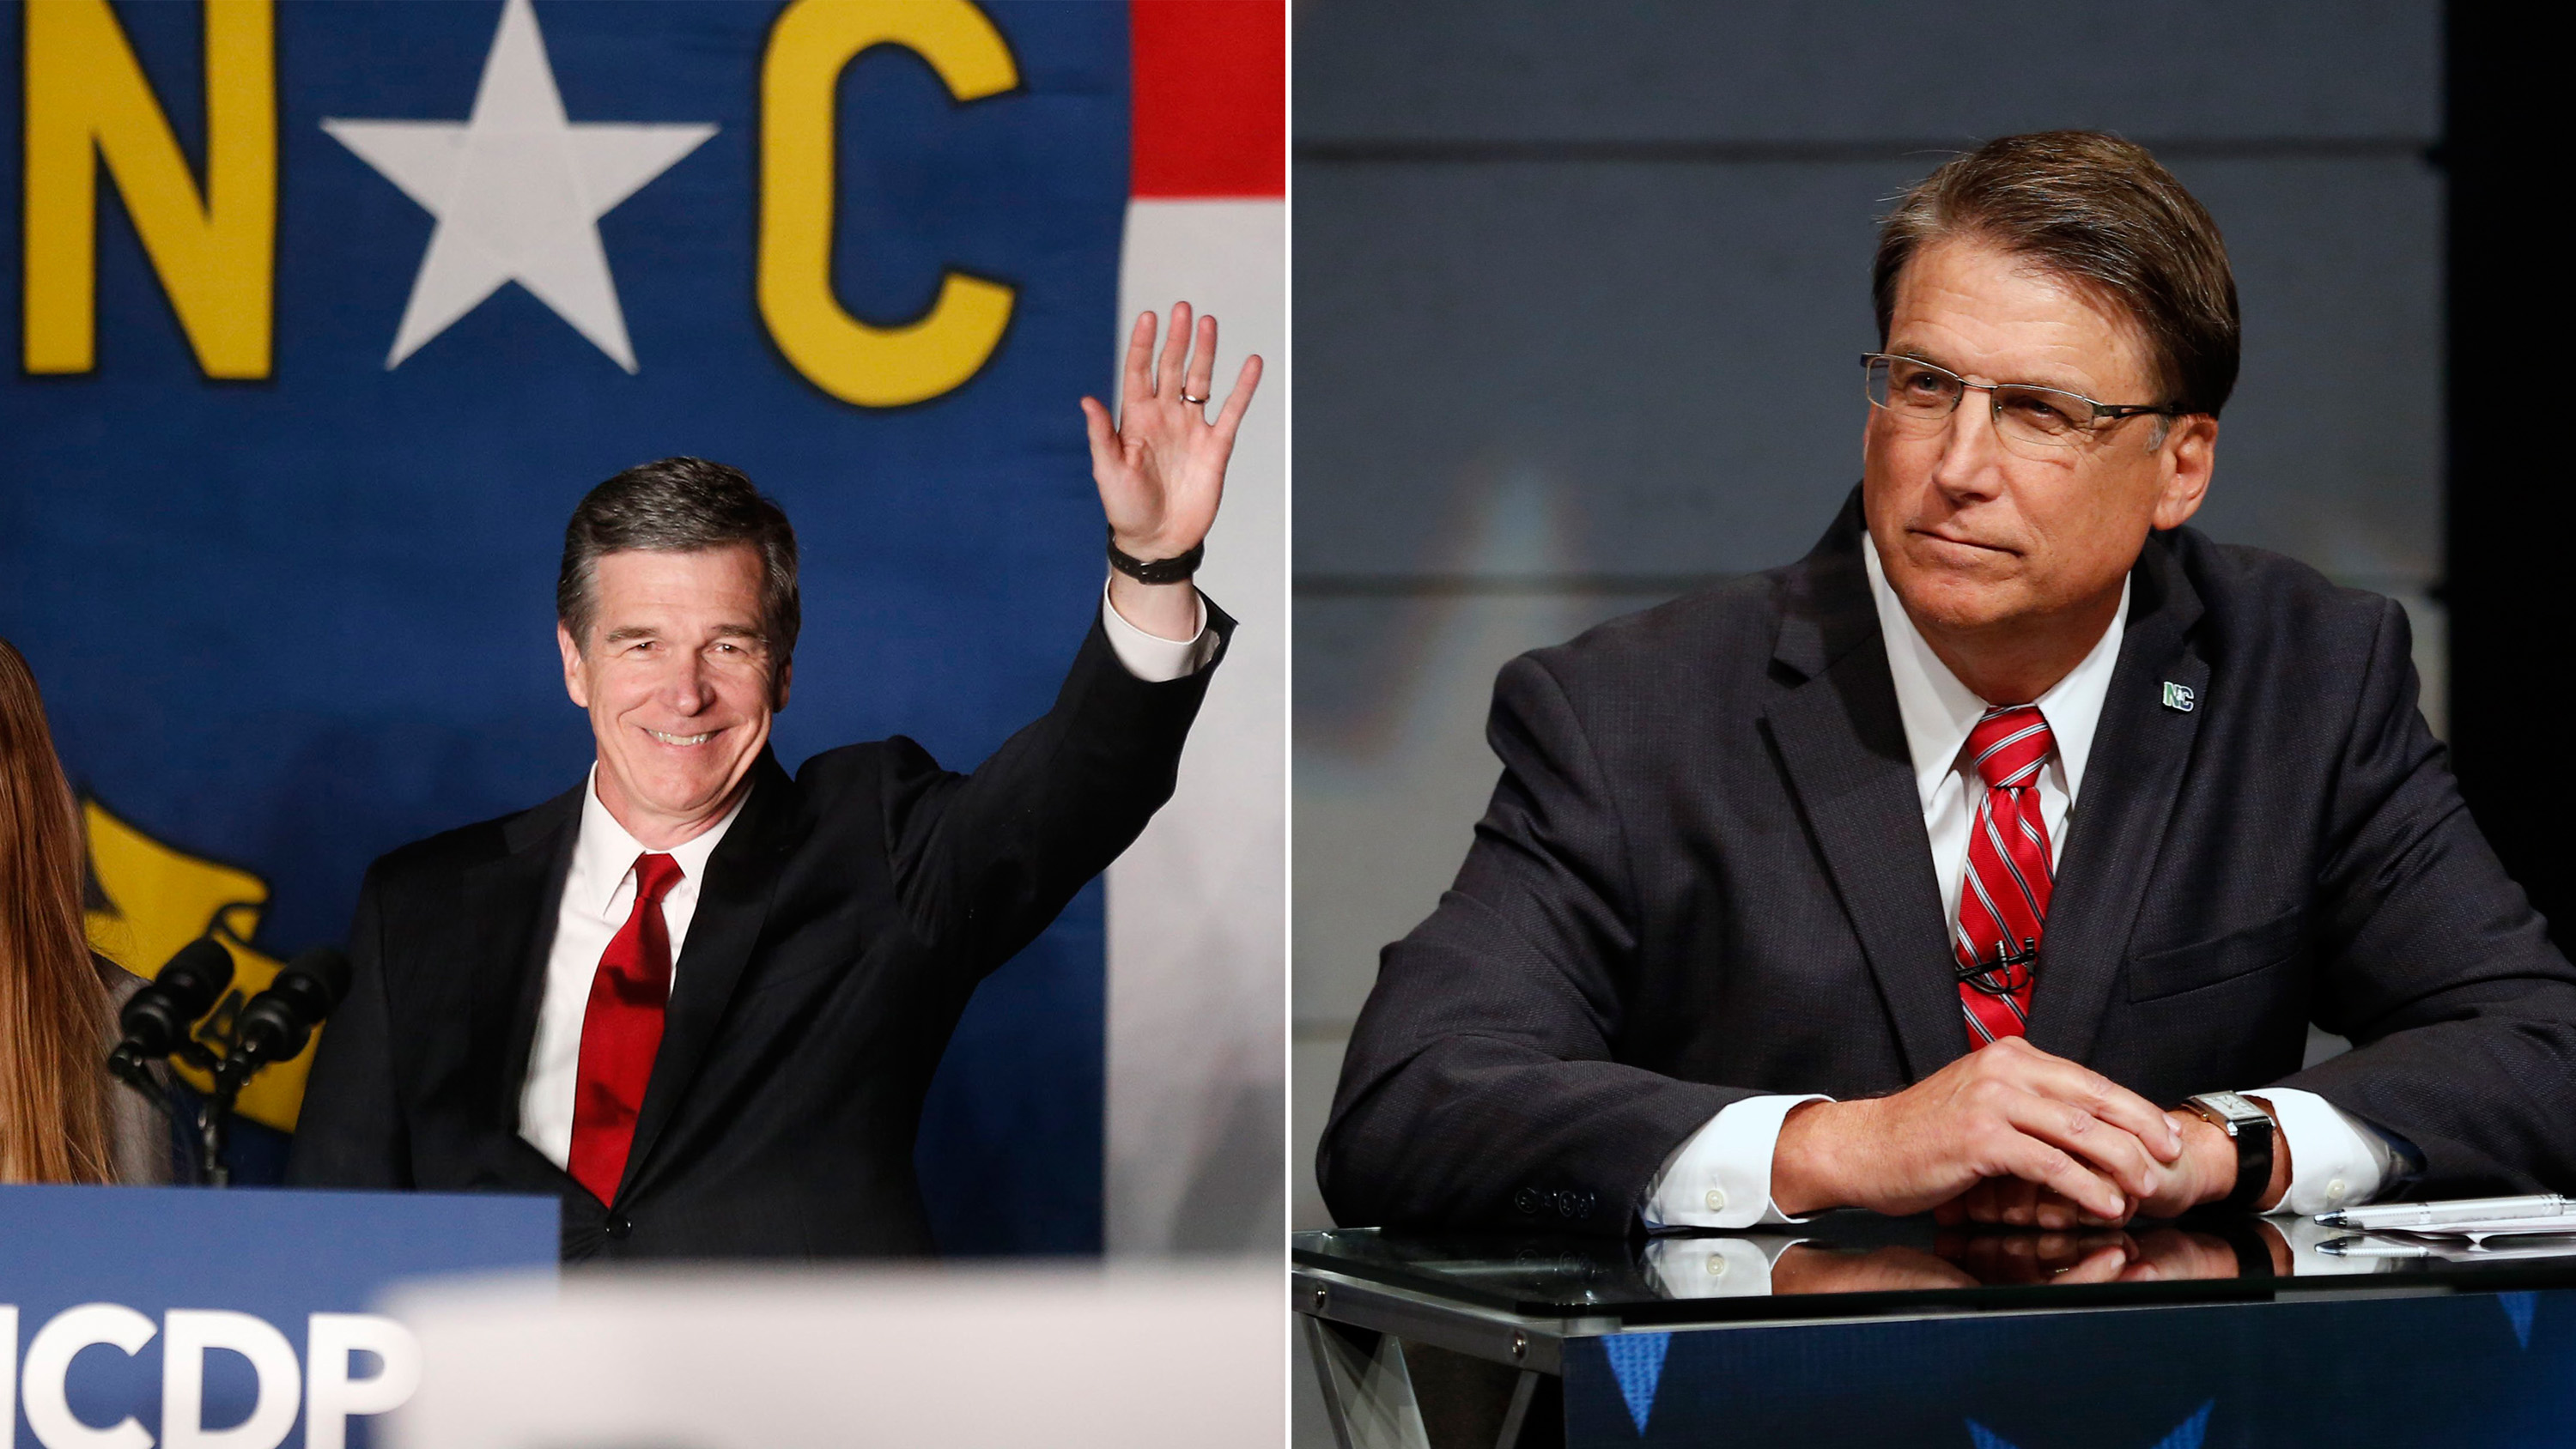 Roy Cooper greets supporters during an election party hosted by the North Carolina Democratic Party on Nov. 8, 2016; Pat McCrory, Republican candidate for Governor of North Carolina, during a debate at WRAL studios in Raleigh, N.C., on Oct. 18, 2016. (Ethan Hyman—Raleigh News &amp; Observer/Getty Images; Chris Seward—Charlotte Observer/Getty Images)